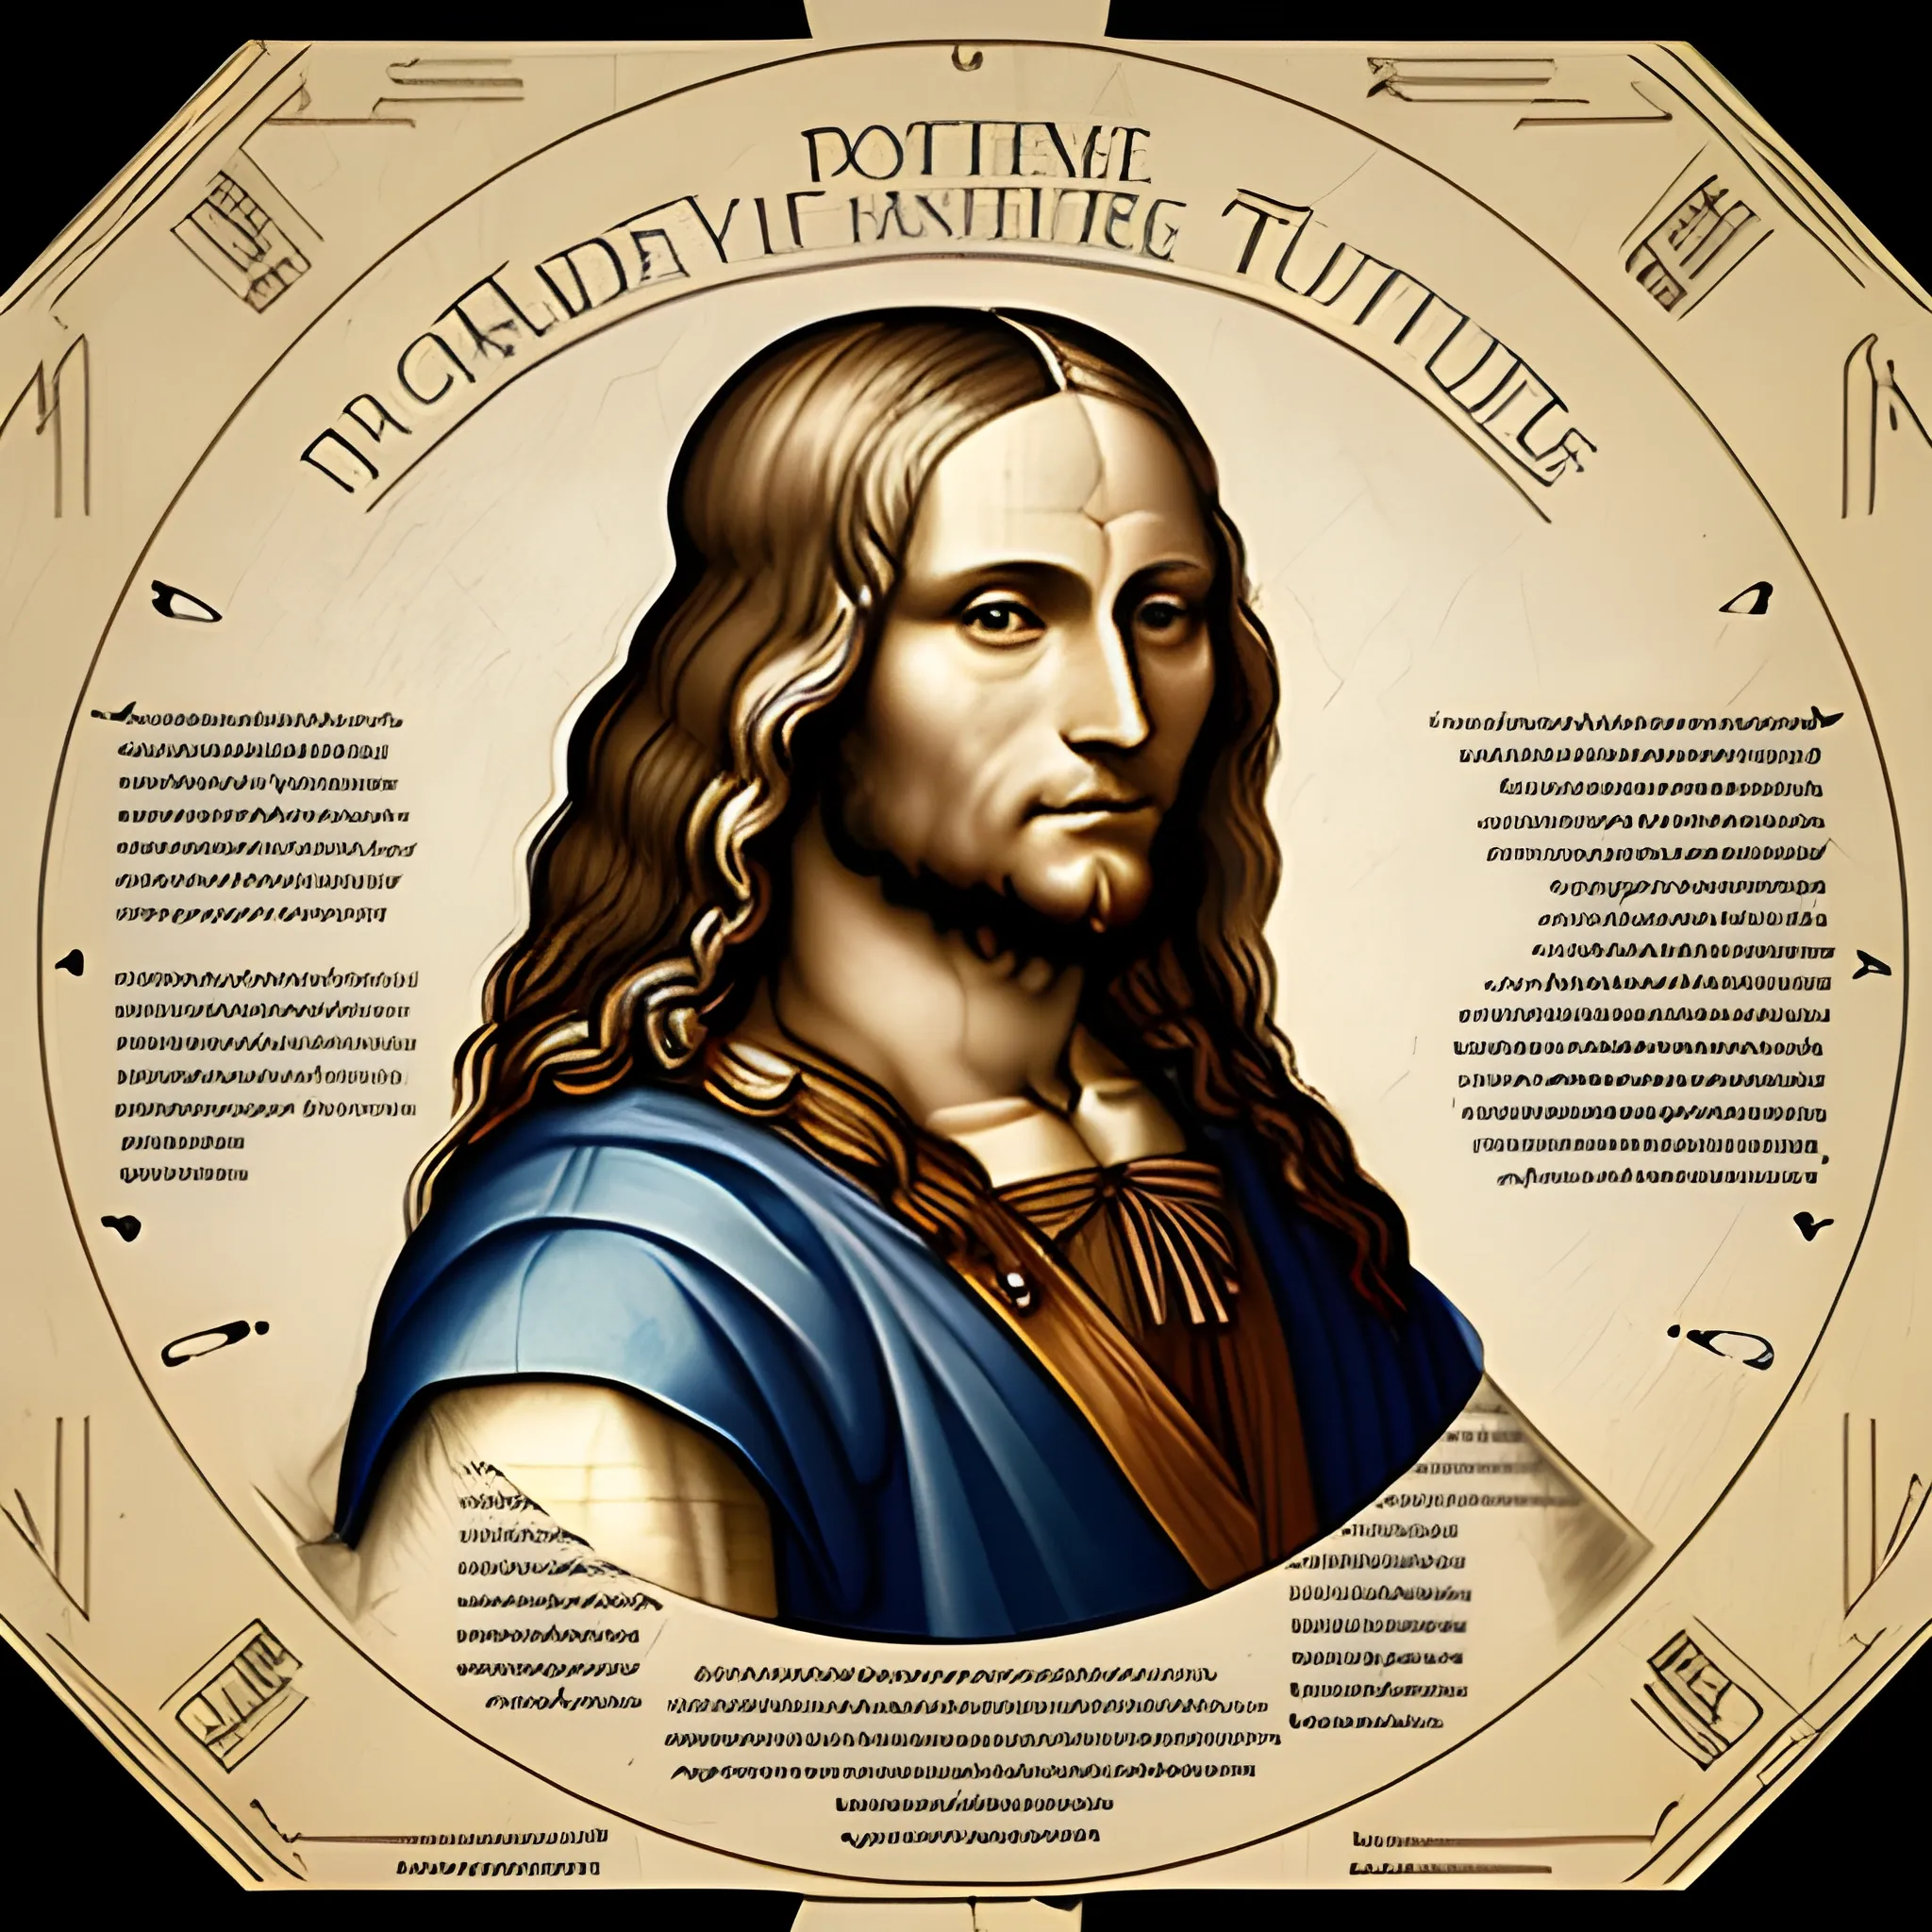 Generate a corporative, future, colorful, modern image, creative, related to digital products, use Leonardo da Vinci's drawing style, do not use machines or txt and use really environment, with this concept: “Polymath thinkers of the future, Leonardo da Vinci in our times”.